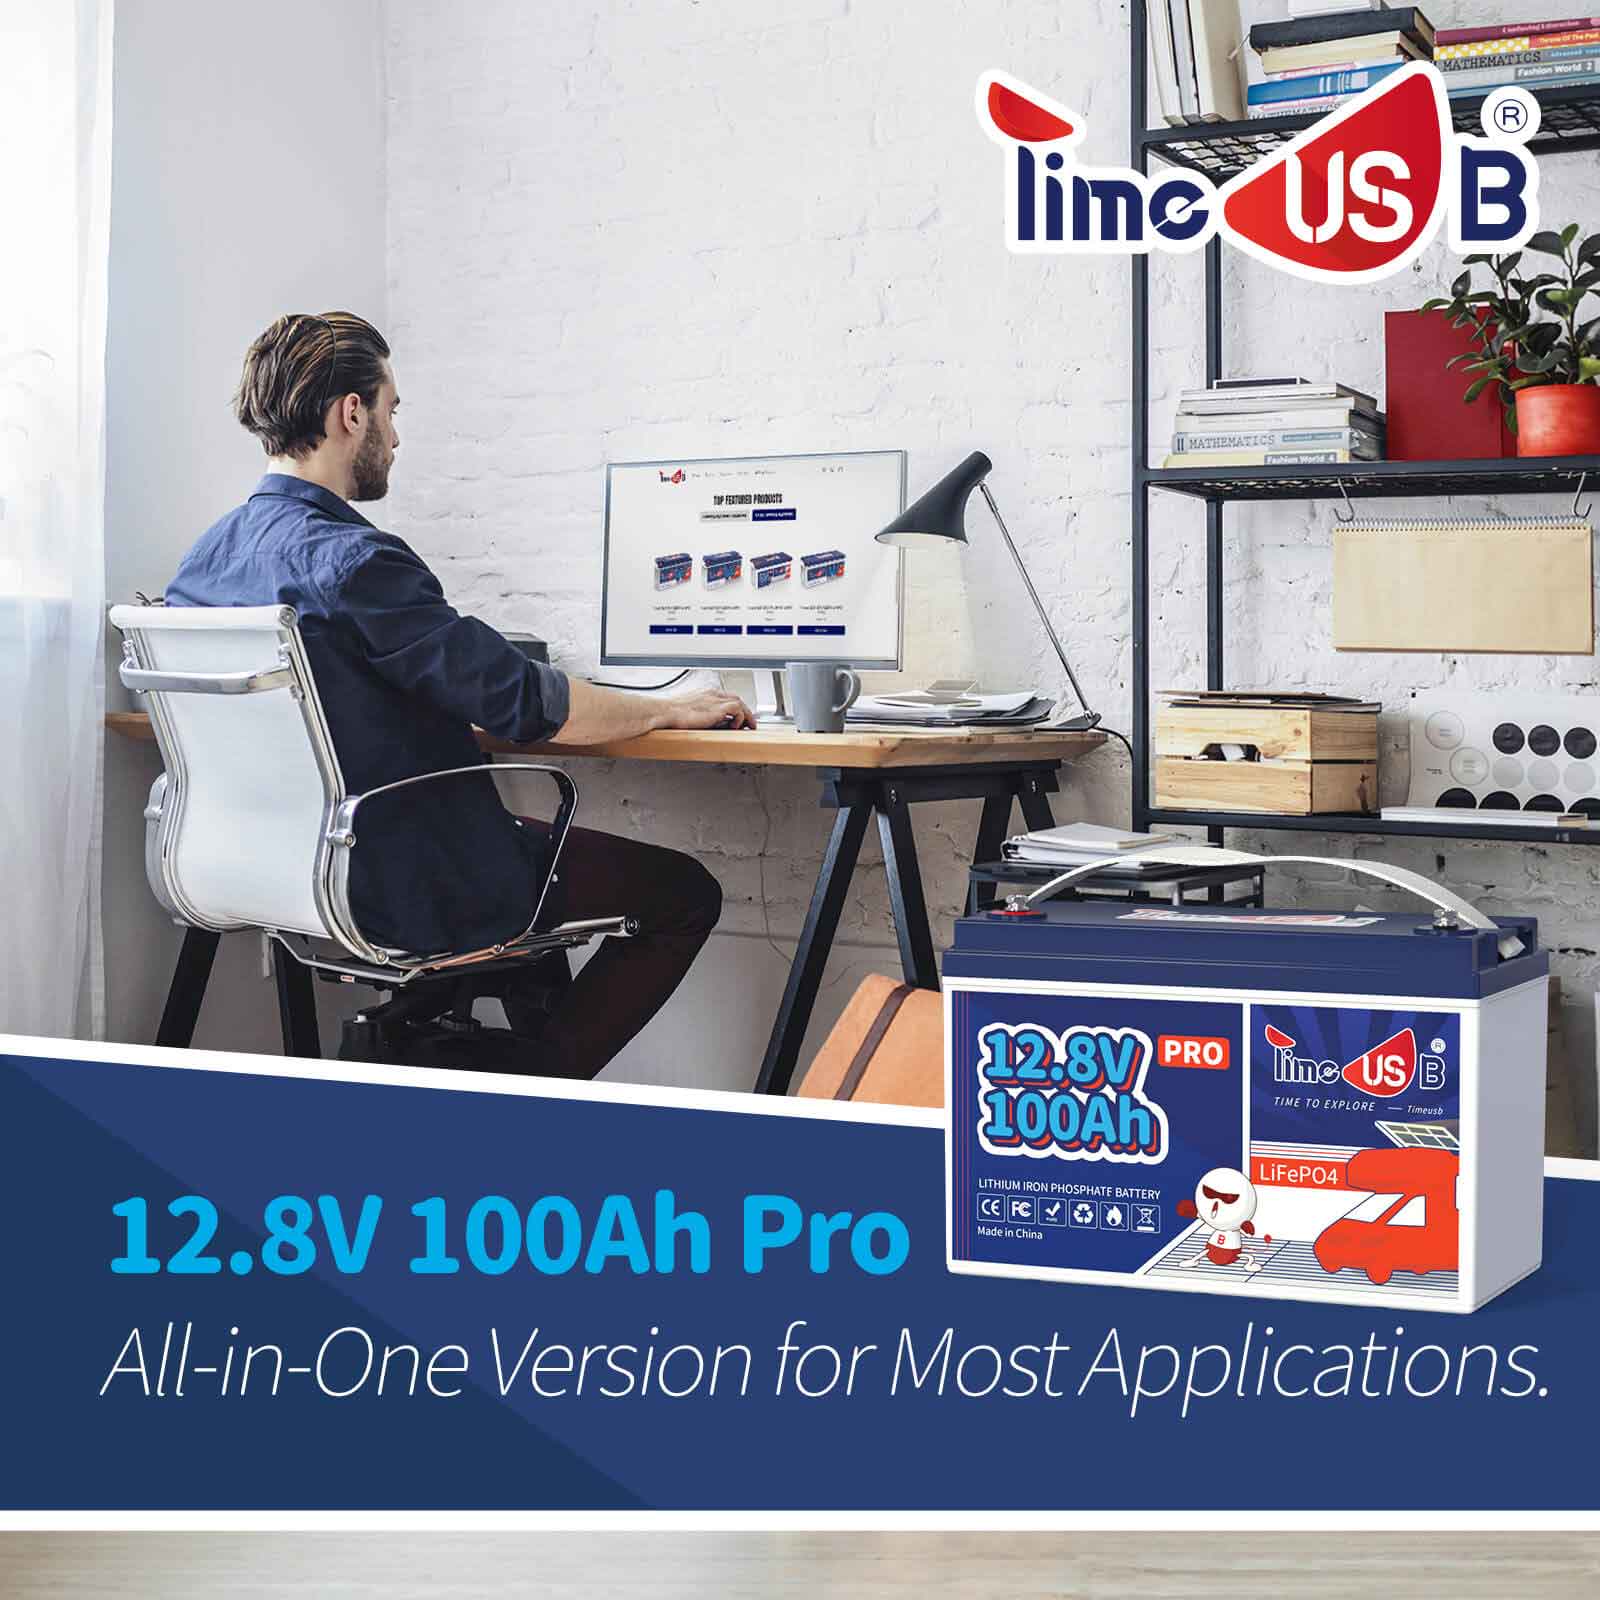 Second-hand Timeusb 12V 100Ah Pro LiFePO4 Battery, 1280Wh & 100A BMS